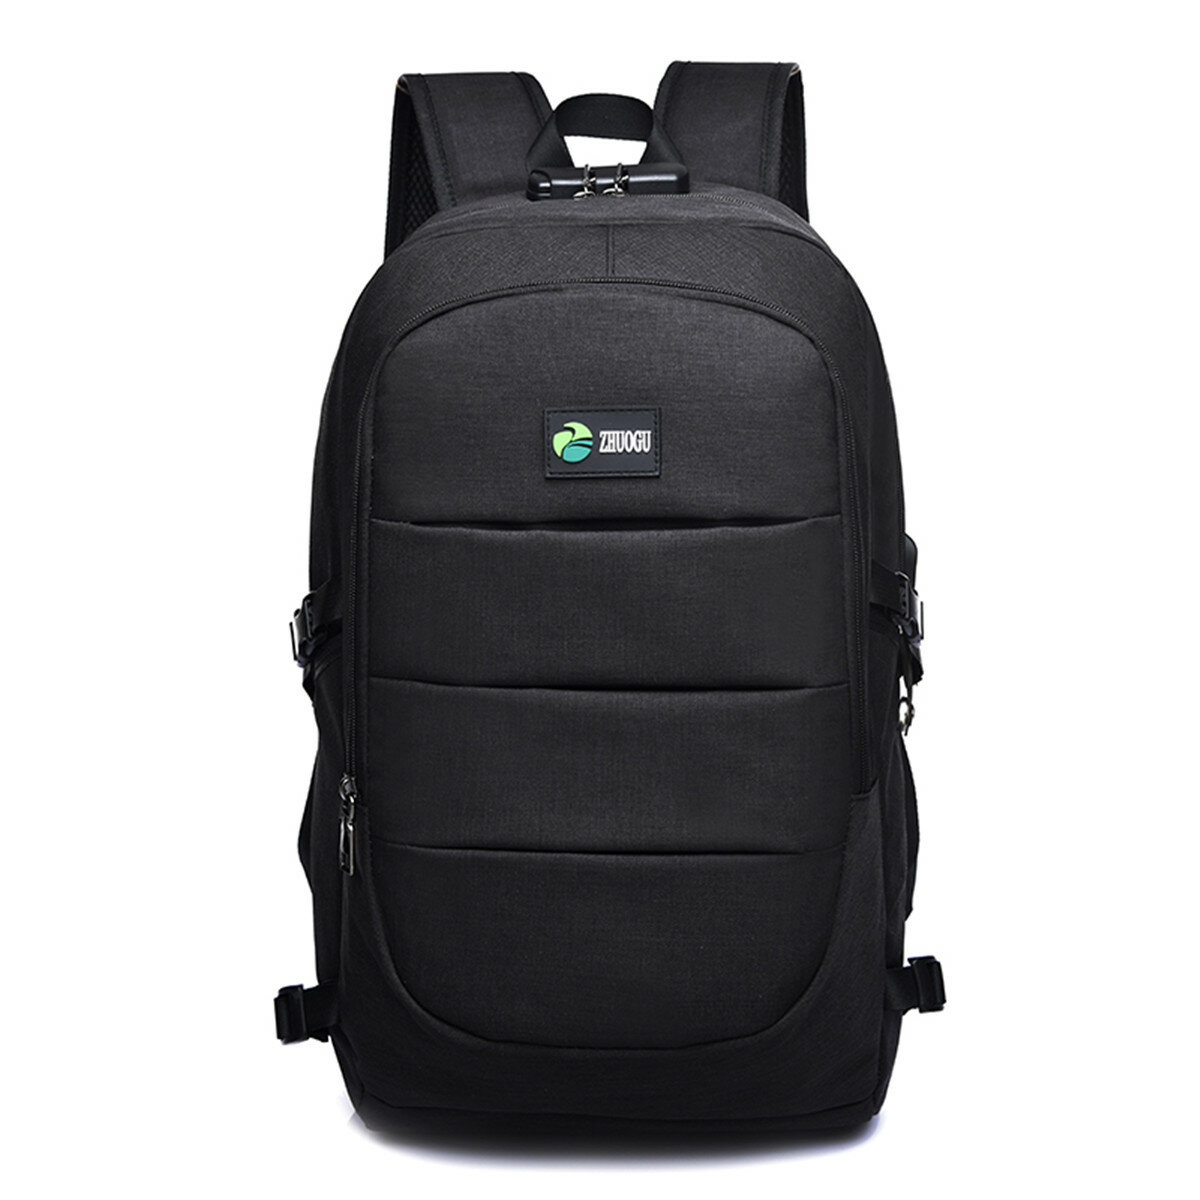 17L USB Charging Backpack Multifunctional Waterproof Guard Against Theft Travel 15 Inch Laptop Bag